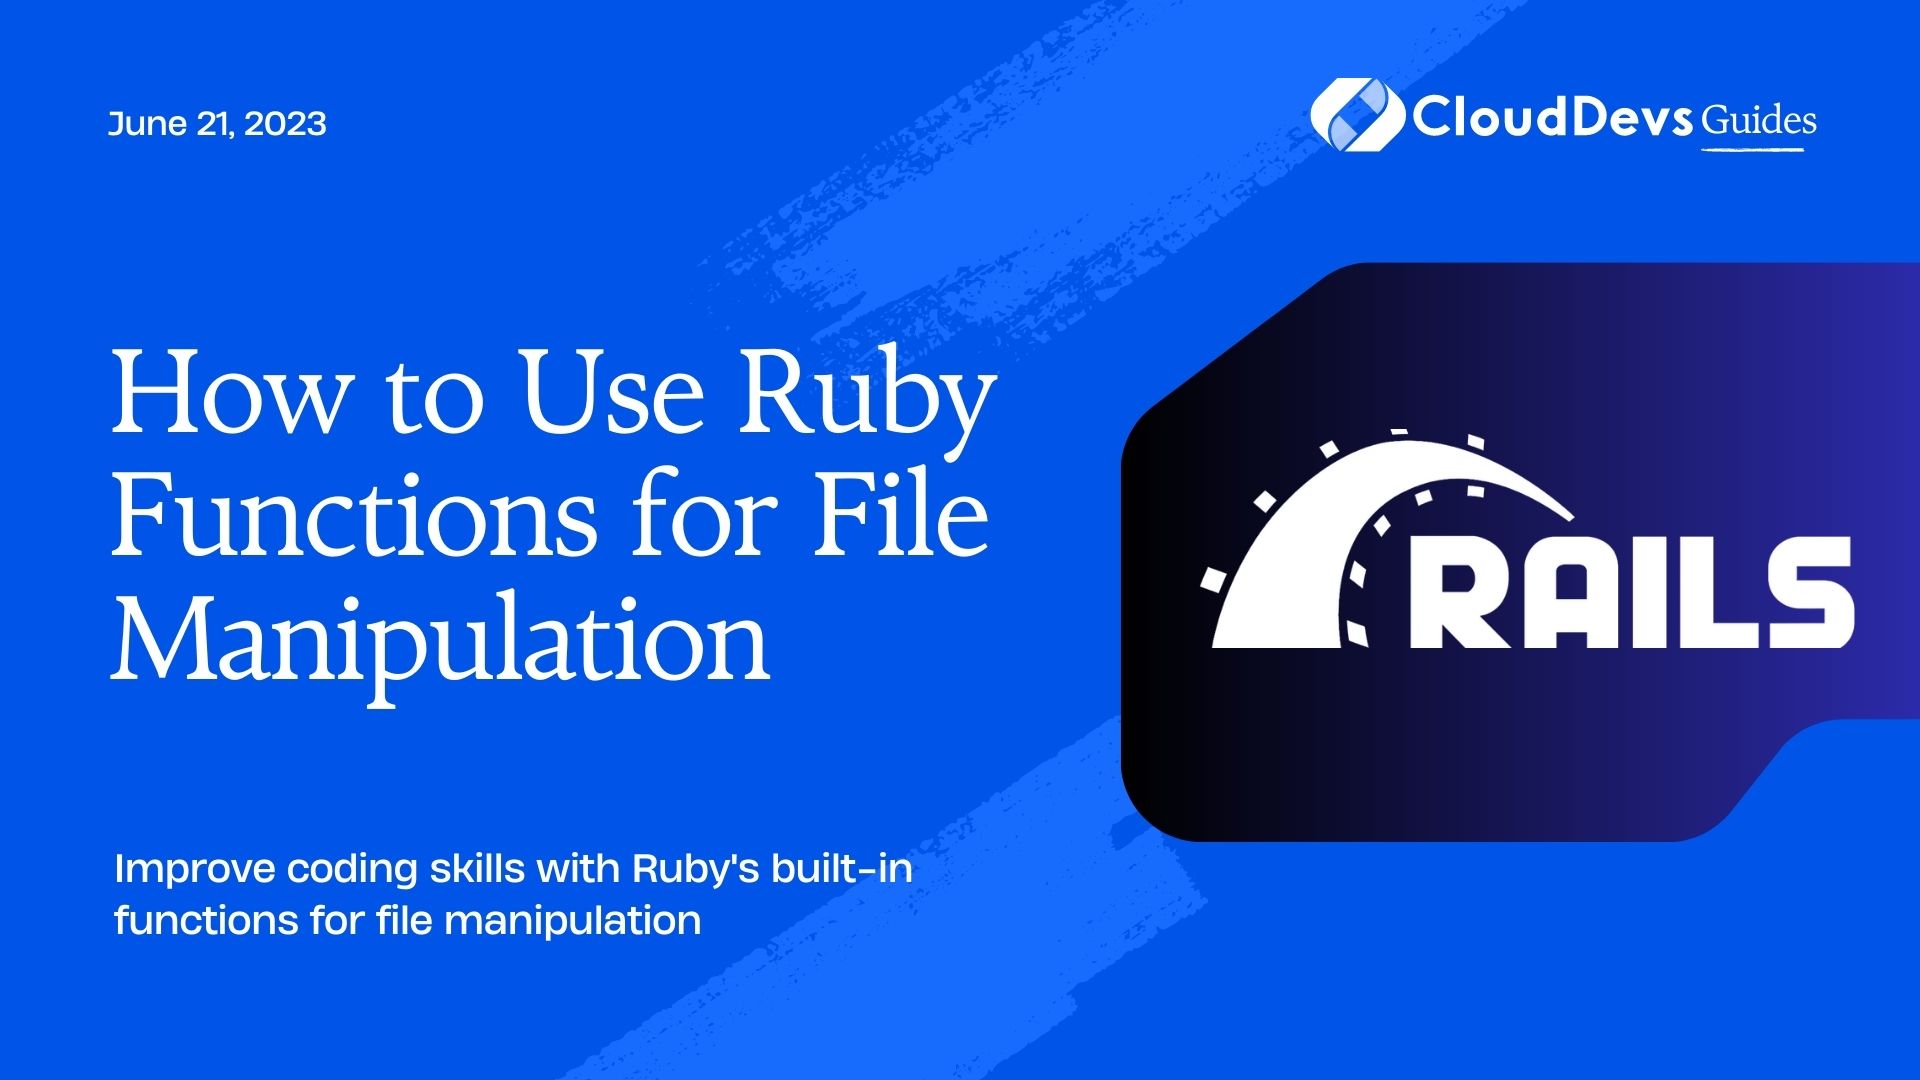 How to Use Ruby Functions for File Manipulation